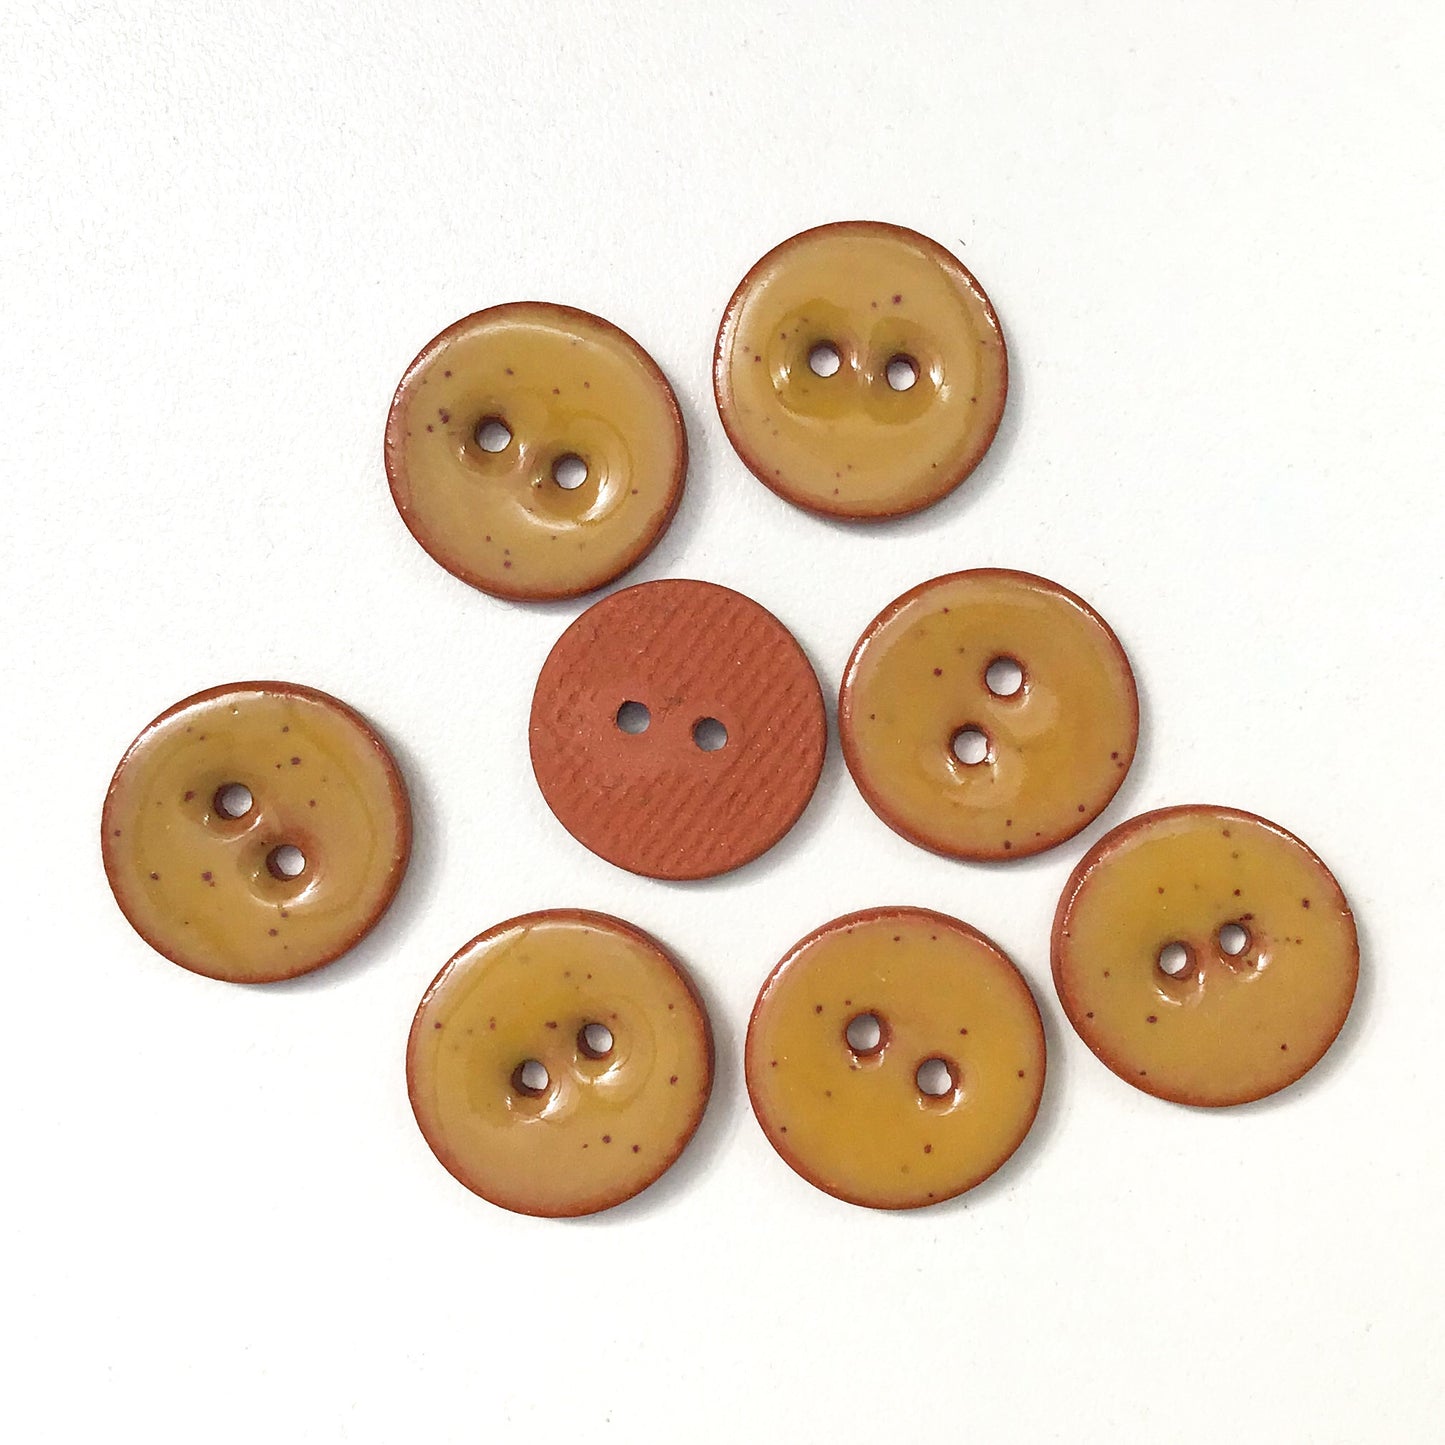 Speckled Mustard Brown Ceramic Buttons - Clay Buttons - 5/8" - 8 Pack (ws-218)